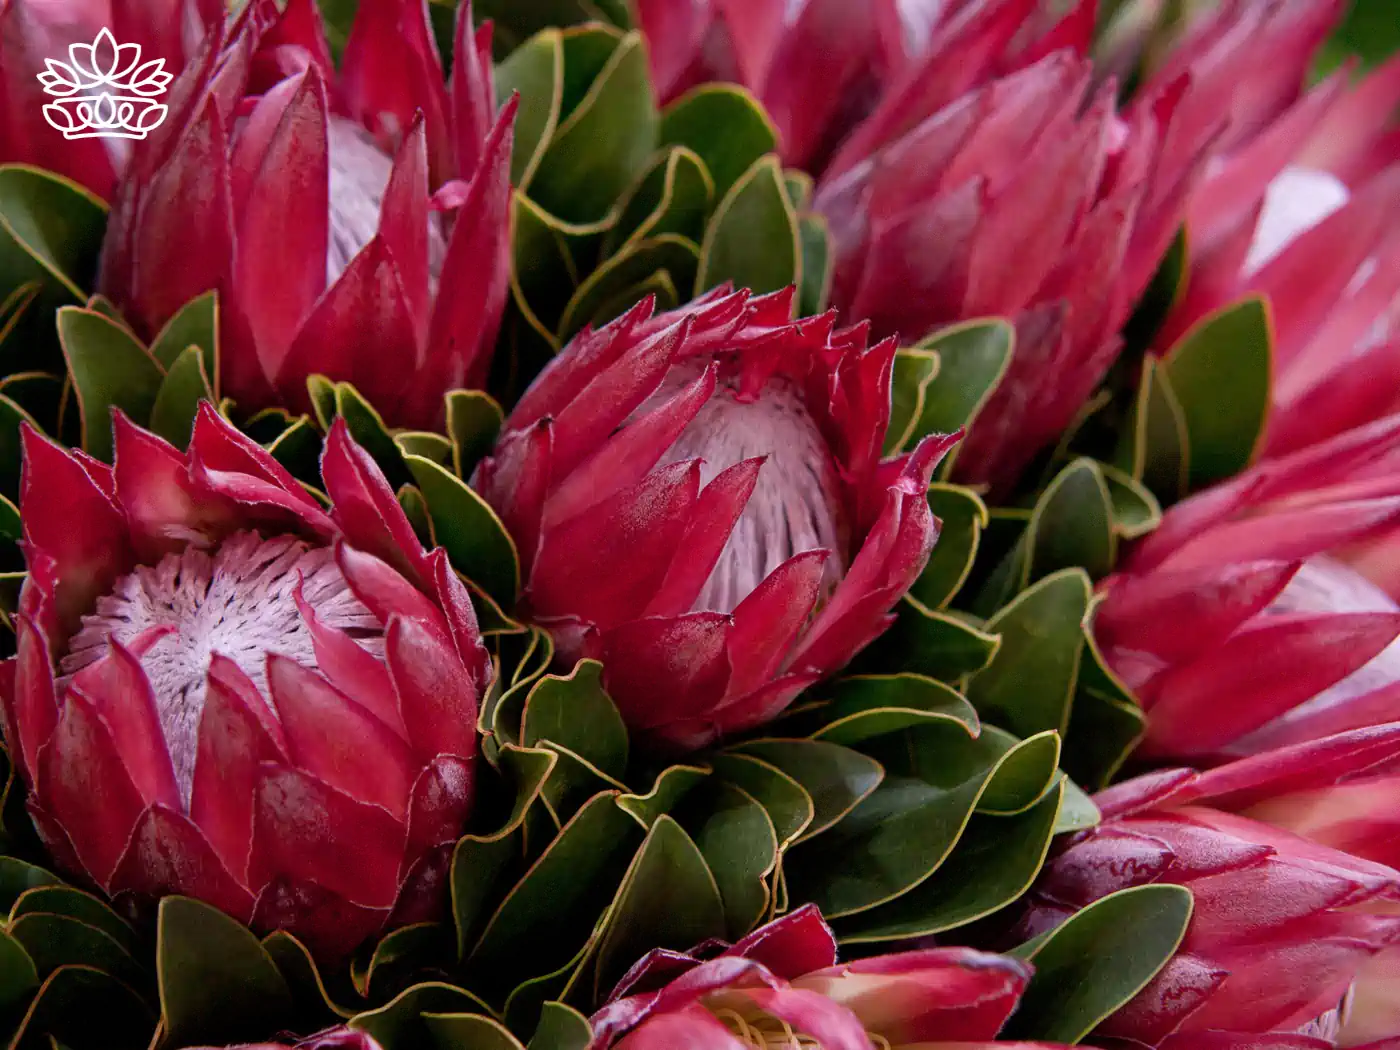 Close-up of vibrant red Protea flowers in full bloom - Fabulous Flowers and Gifts, Proteas Collection